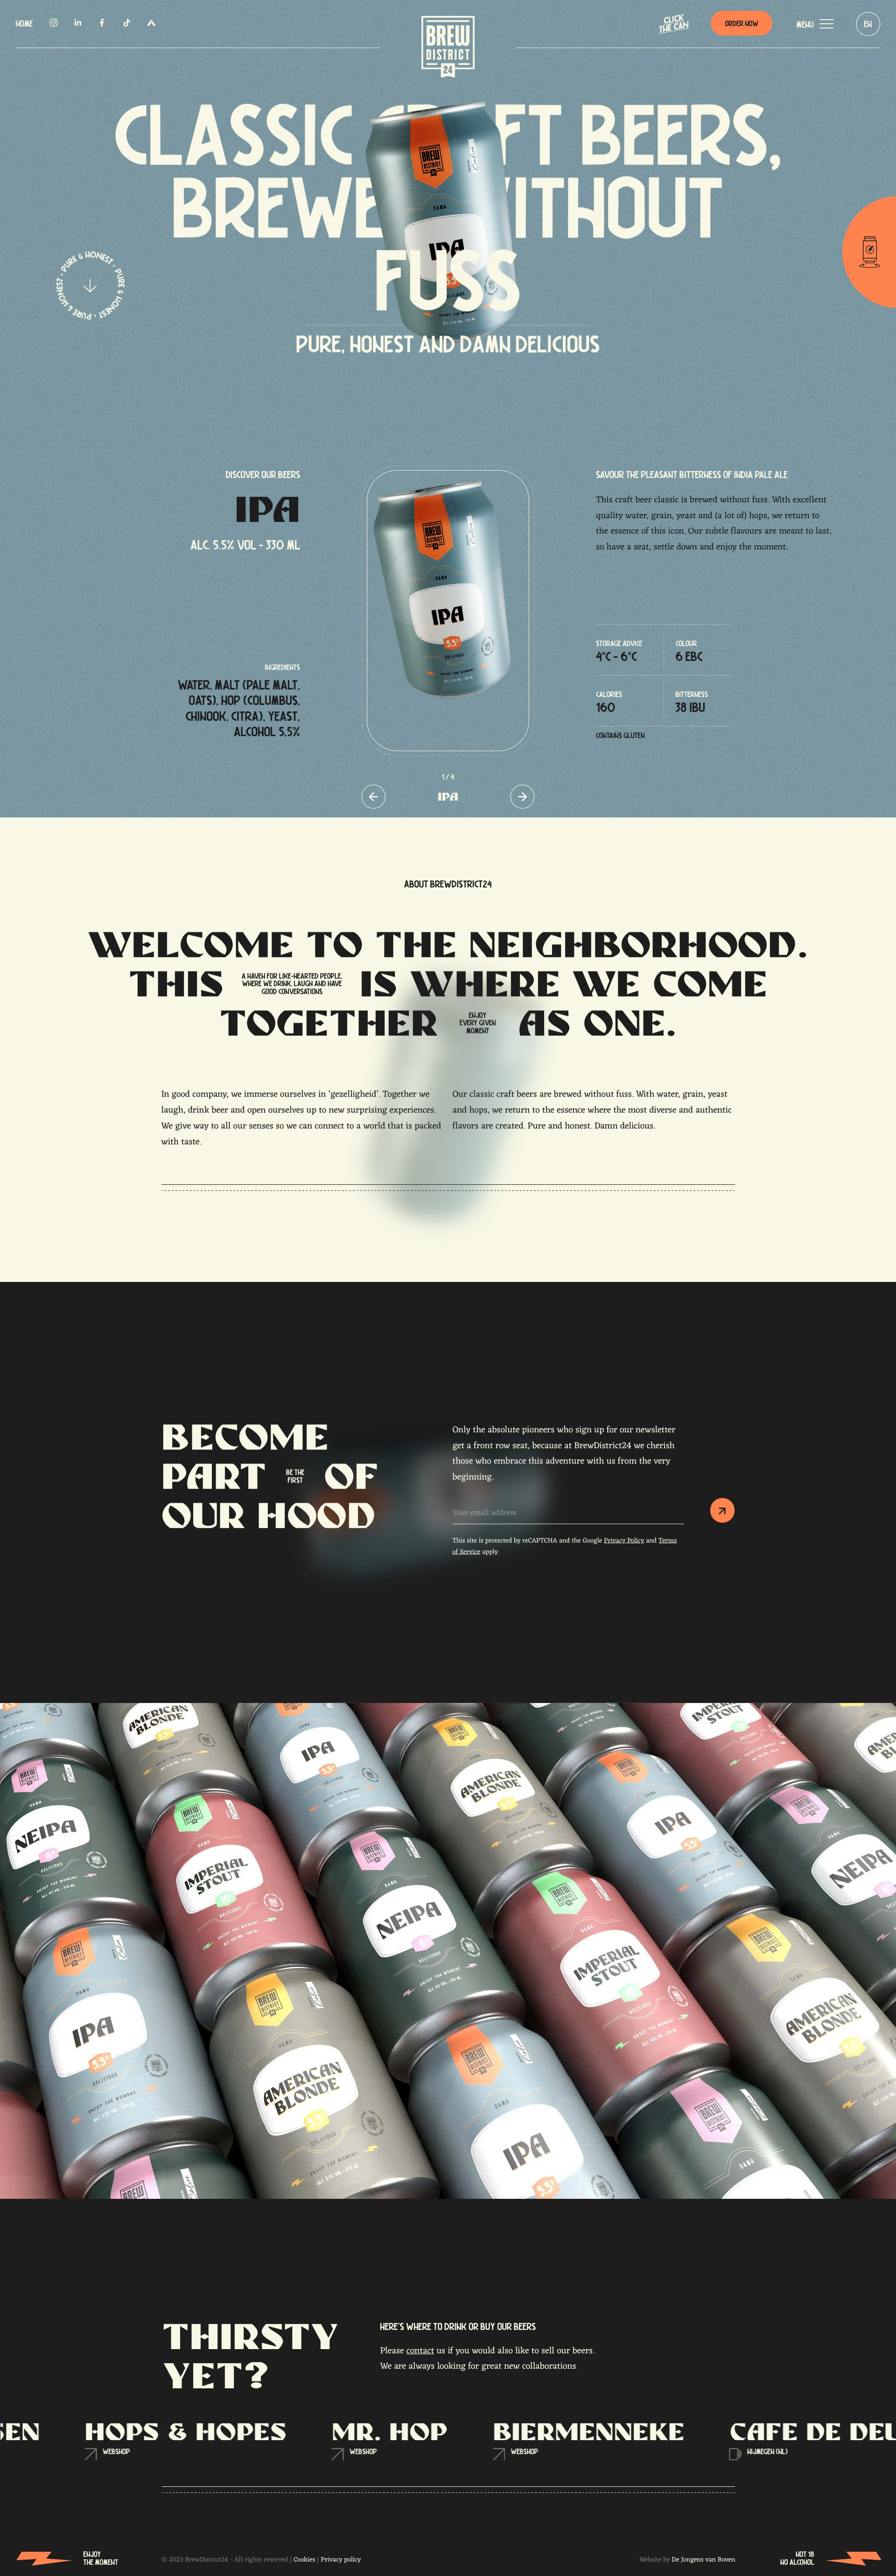 BrewDistrict24 Landing Page Example: Welcome to the neighbourhood. Our classic craft beers are brewed without fuss. Pure and honest. Damn delicious.